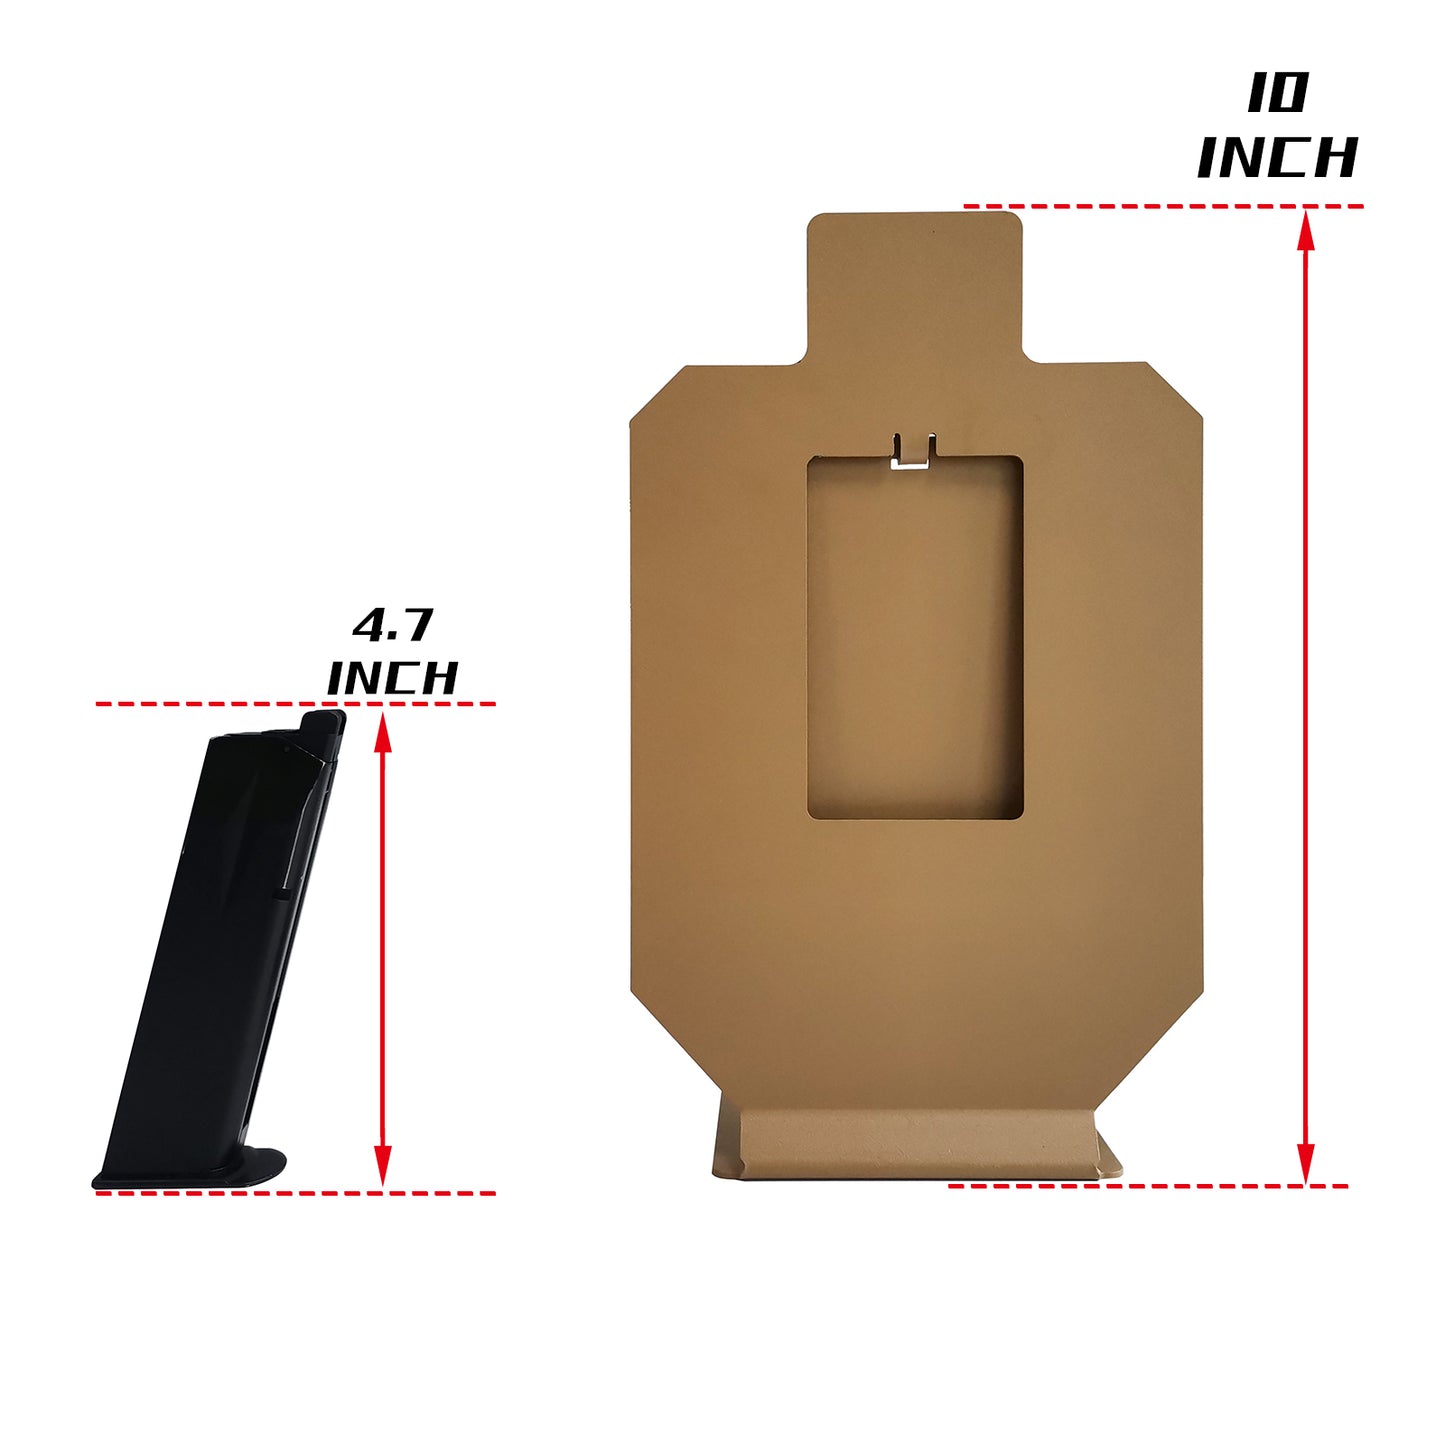 Atflbox 2 Pcs Resetting The Metal Scale Down Silhouette Shooting Target Stand for Pistol Airsoft BB Gun